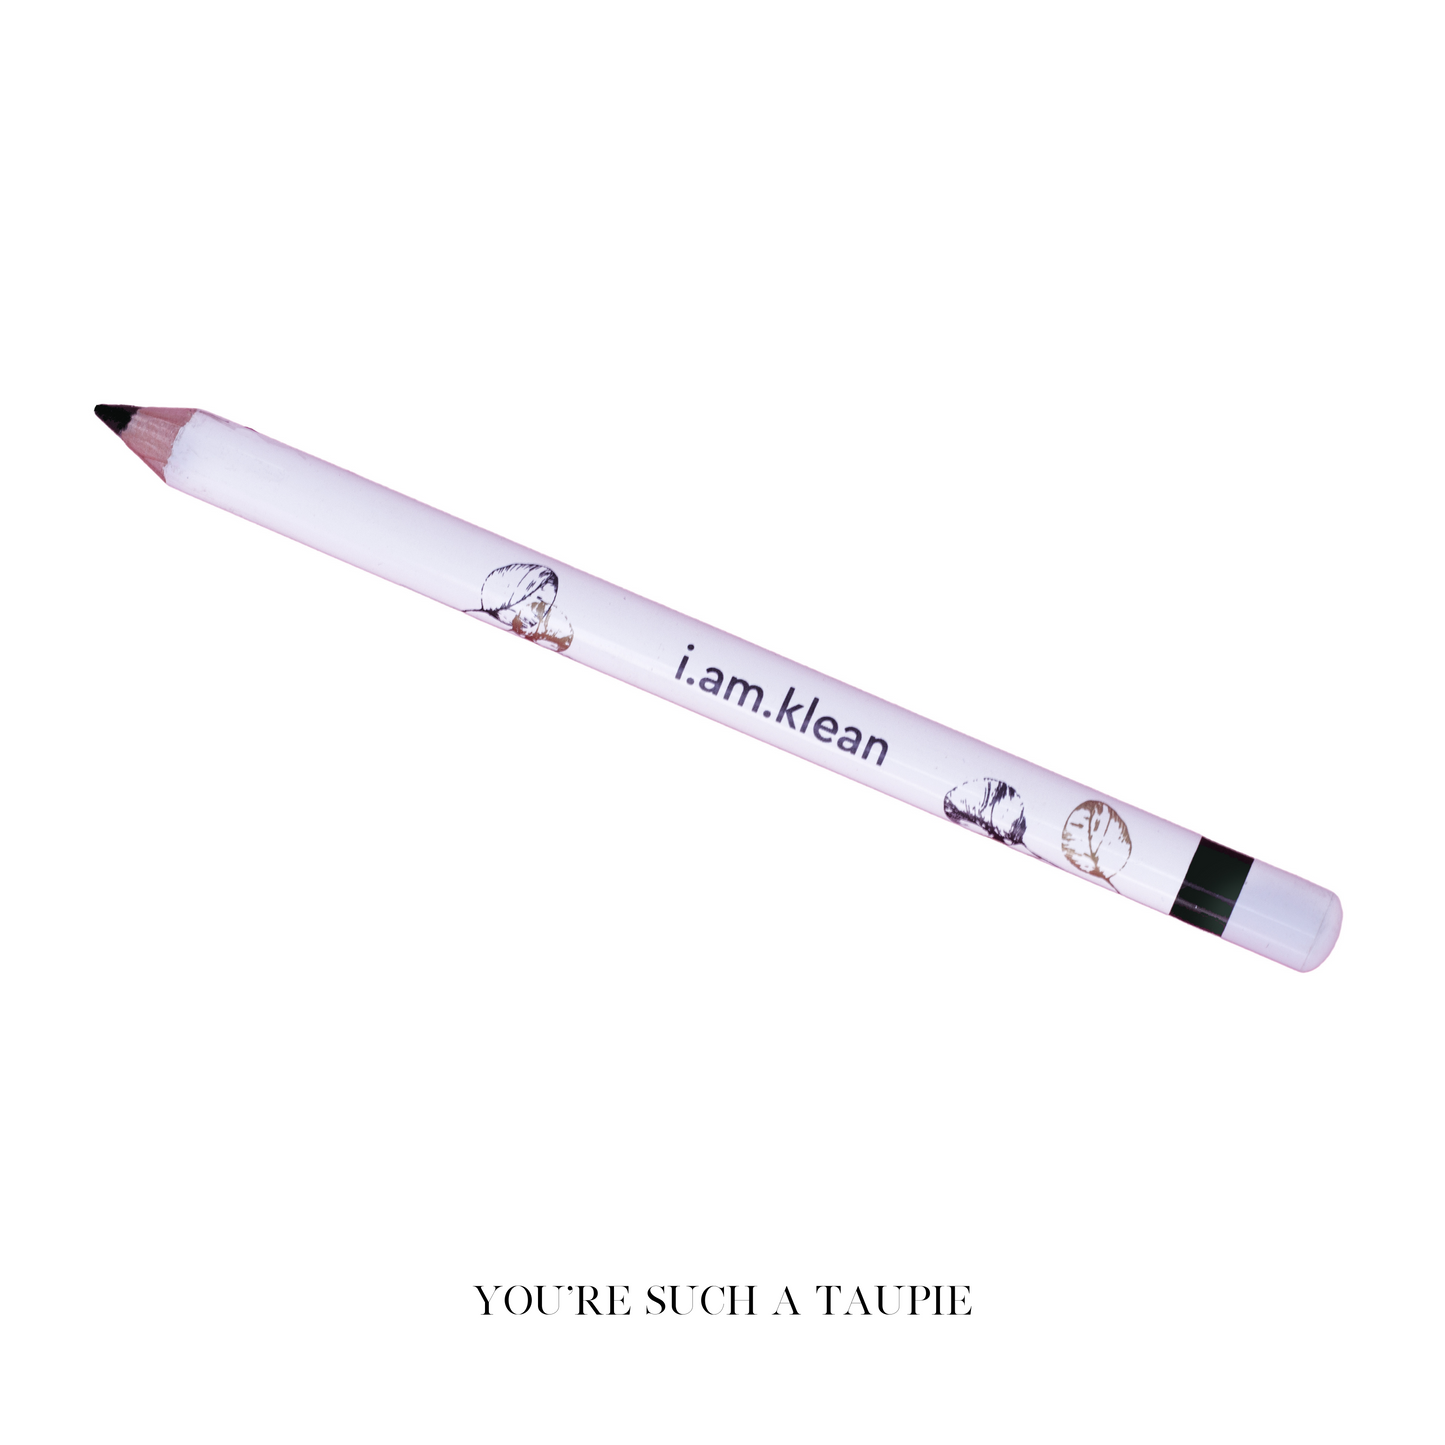 Klean Eyepencil - you're such a taupie